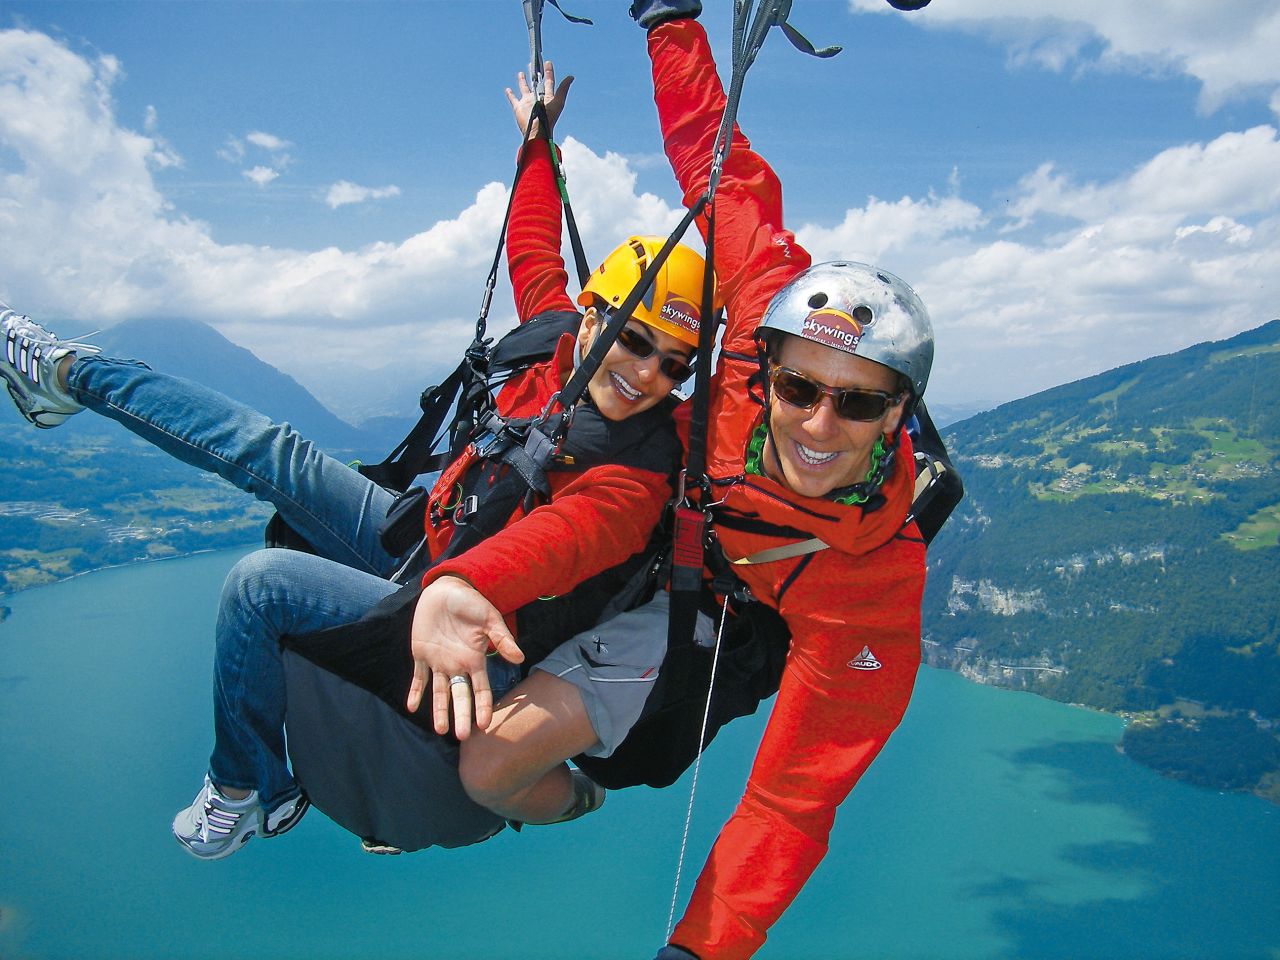 Circling around rising air currents, known as thermals, allows paragliders to ascend. Once they're up, it's easy gliding over Lake Thun and Lake Brienz.